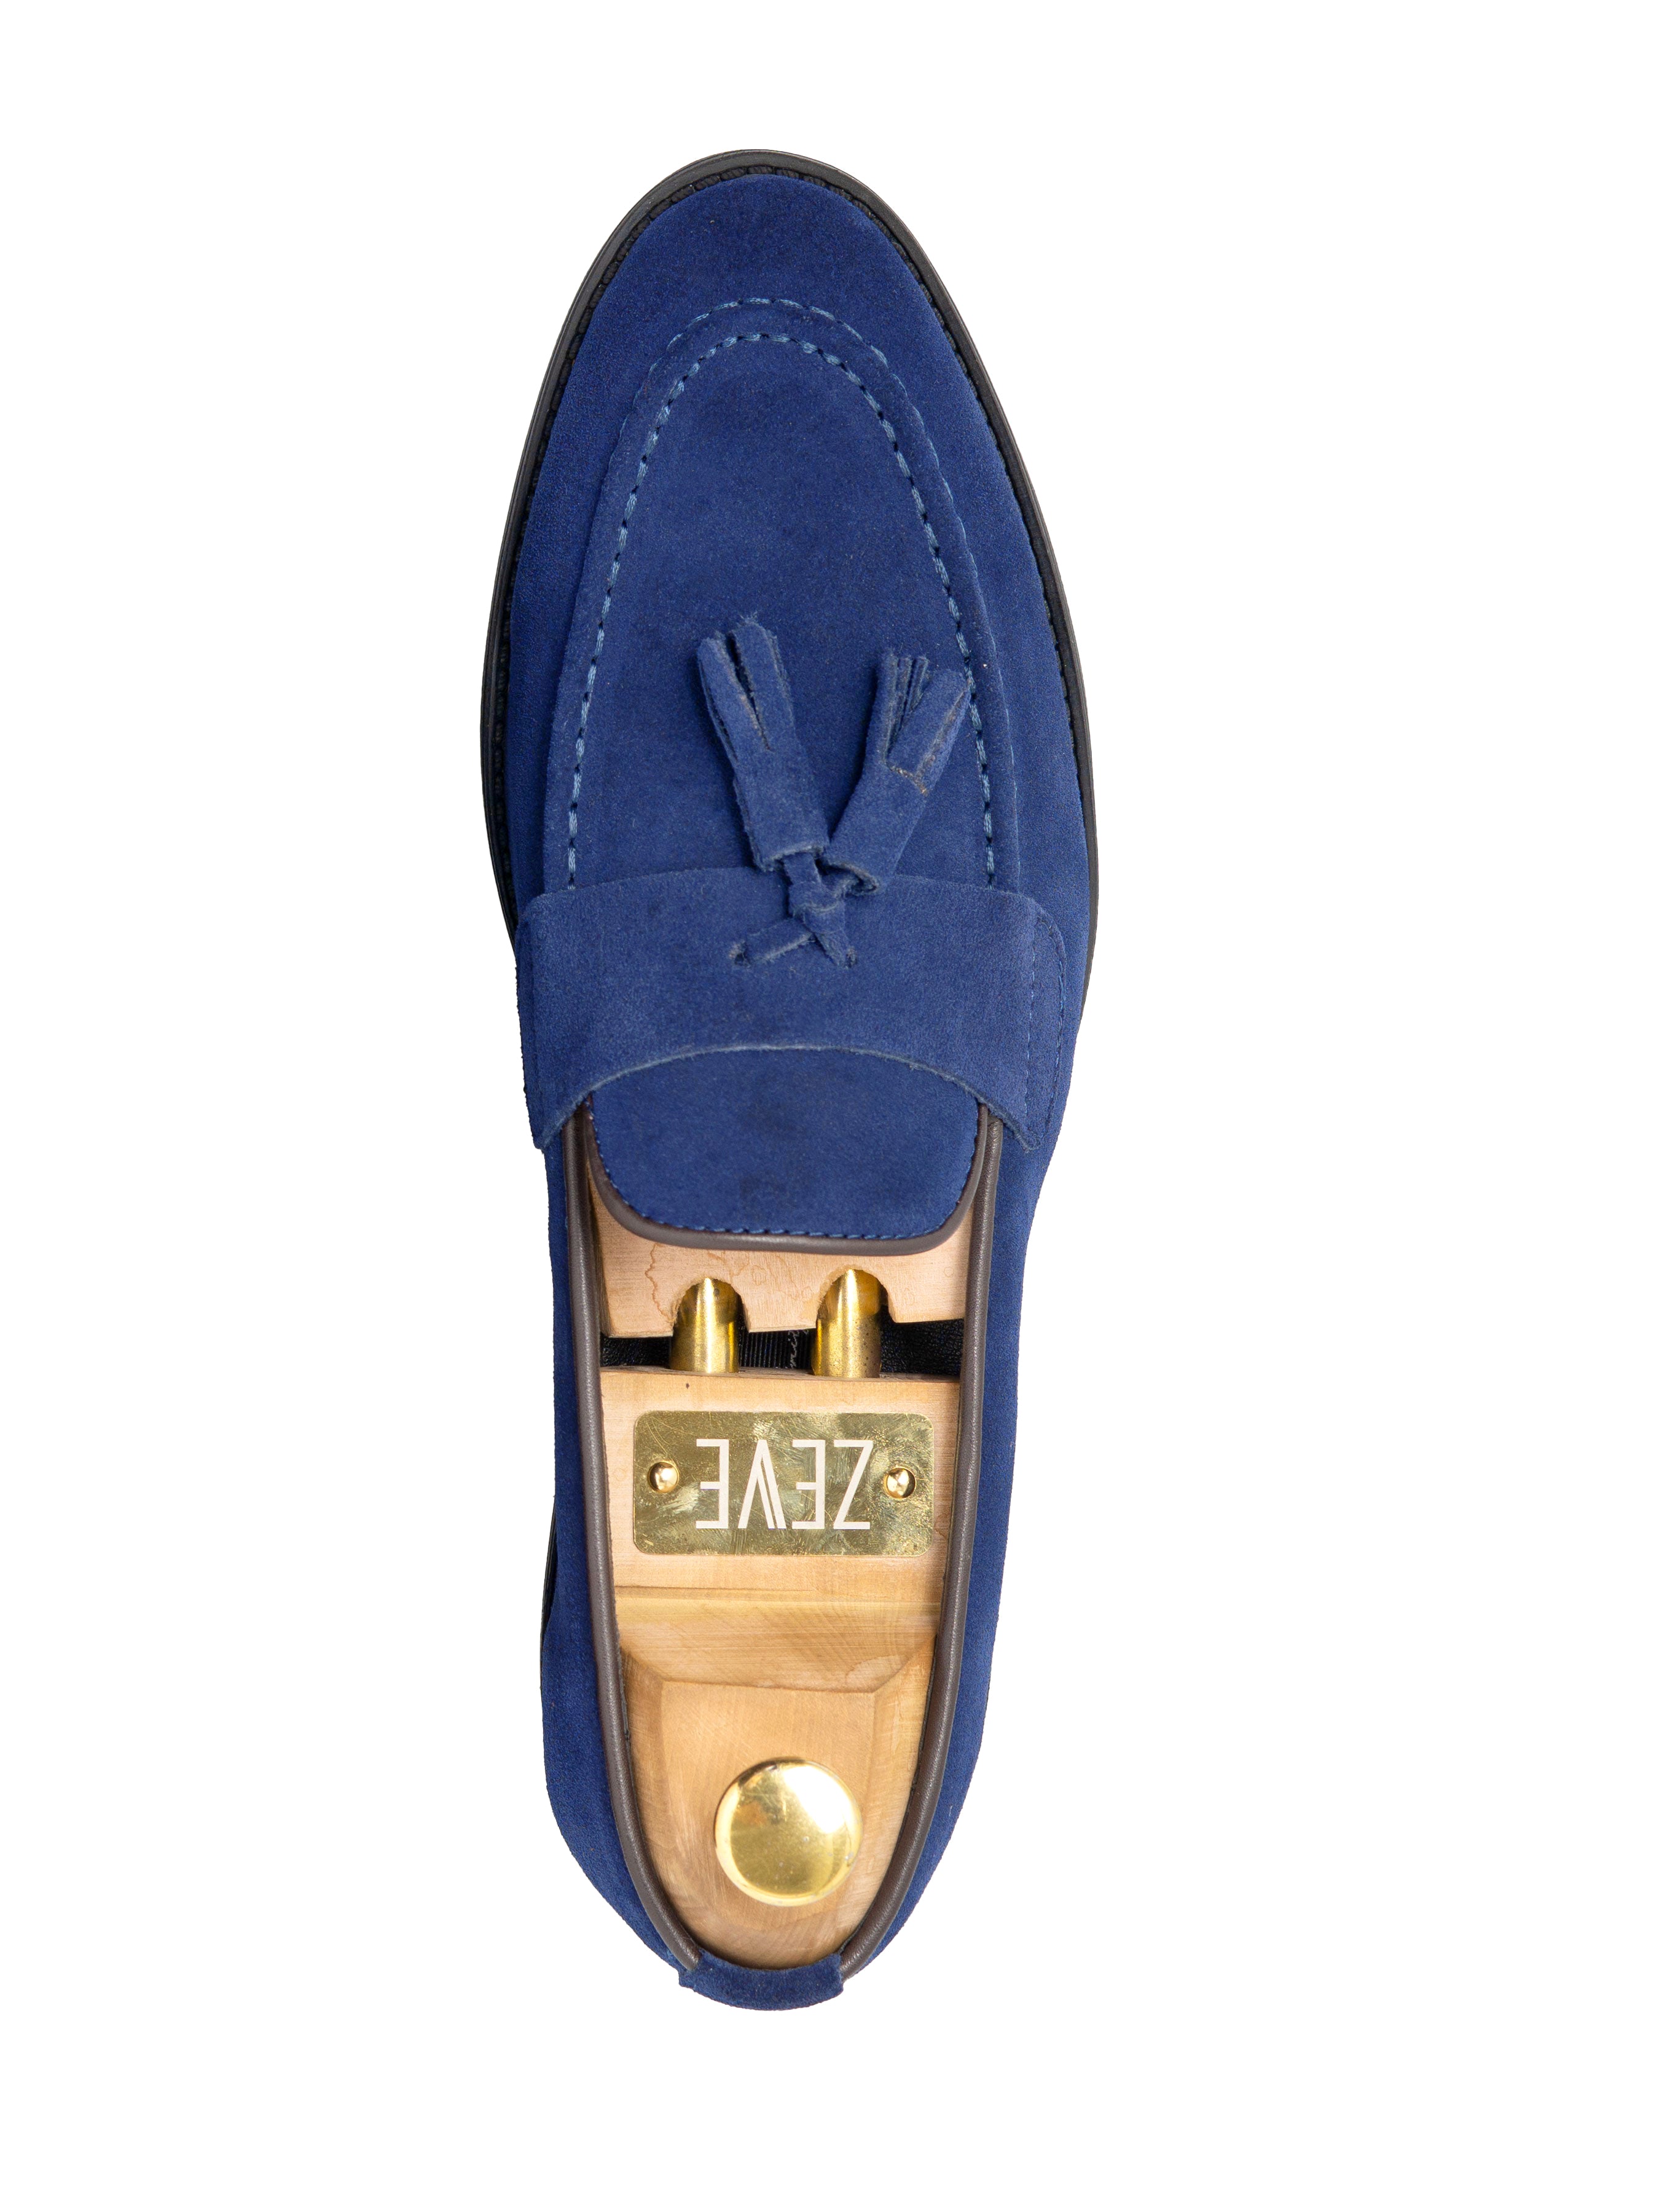 Rocky Tassel Loafer - Royal Blue Suede Leather (Flexi-Sole)